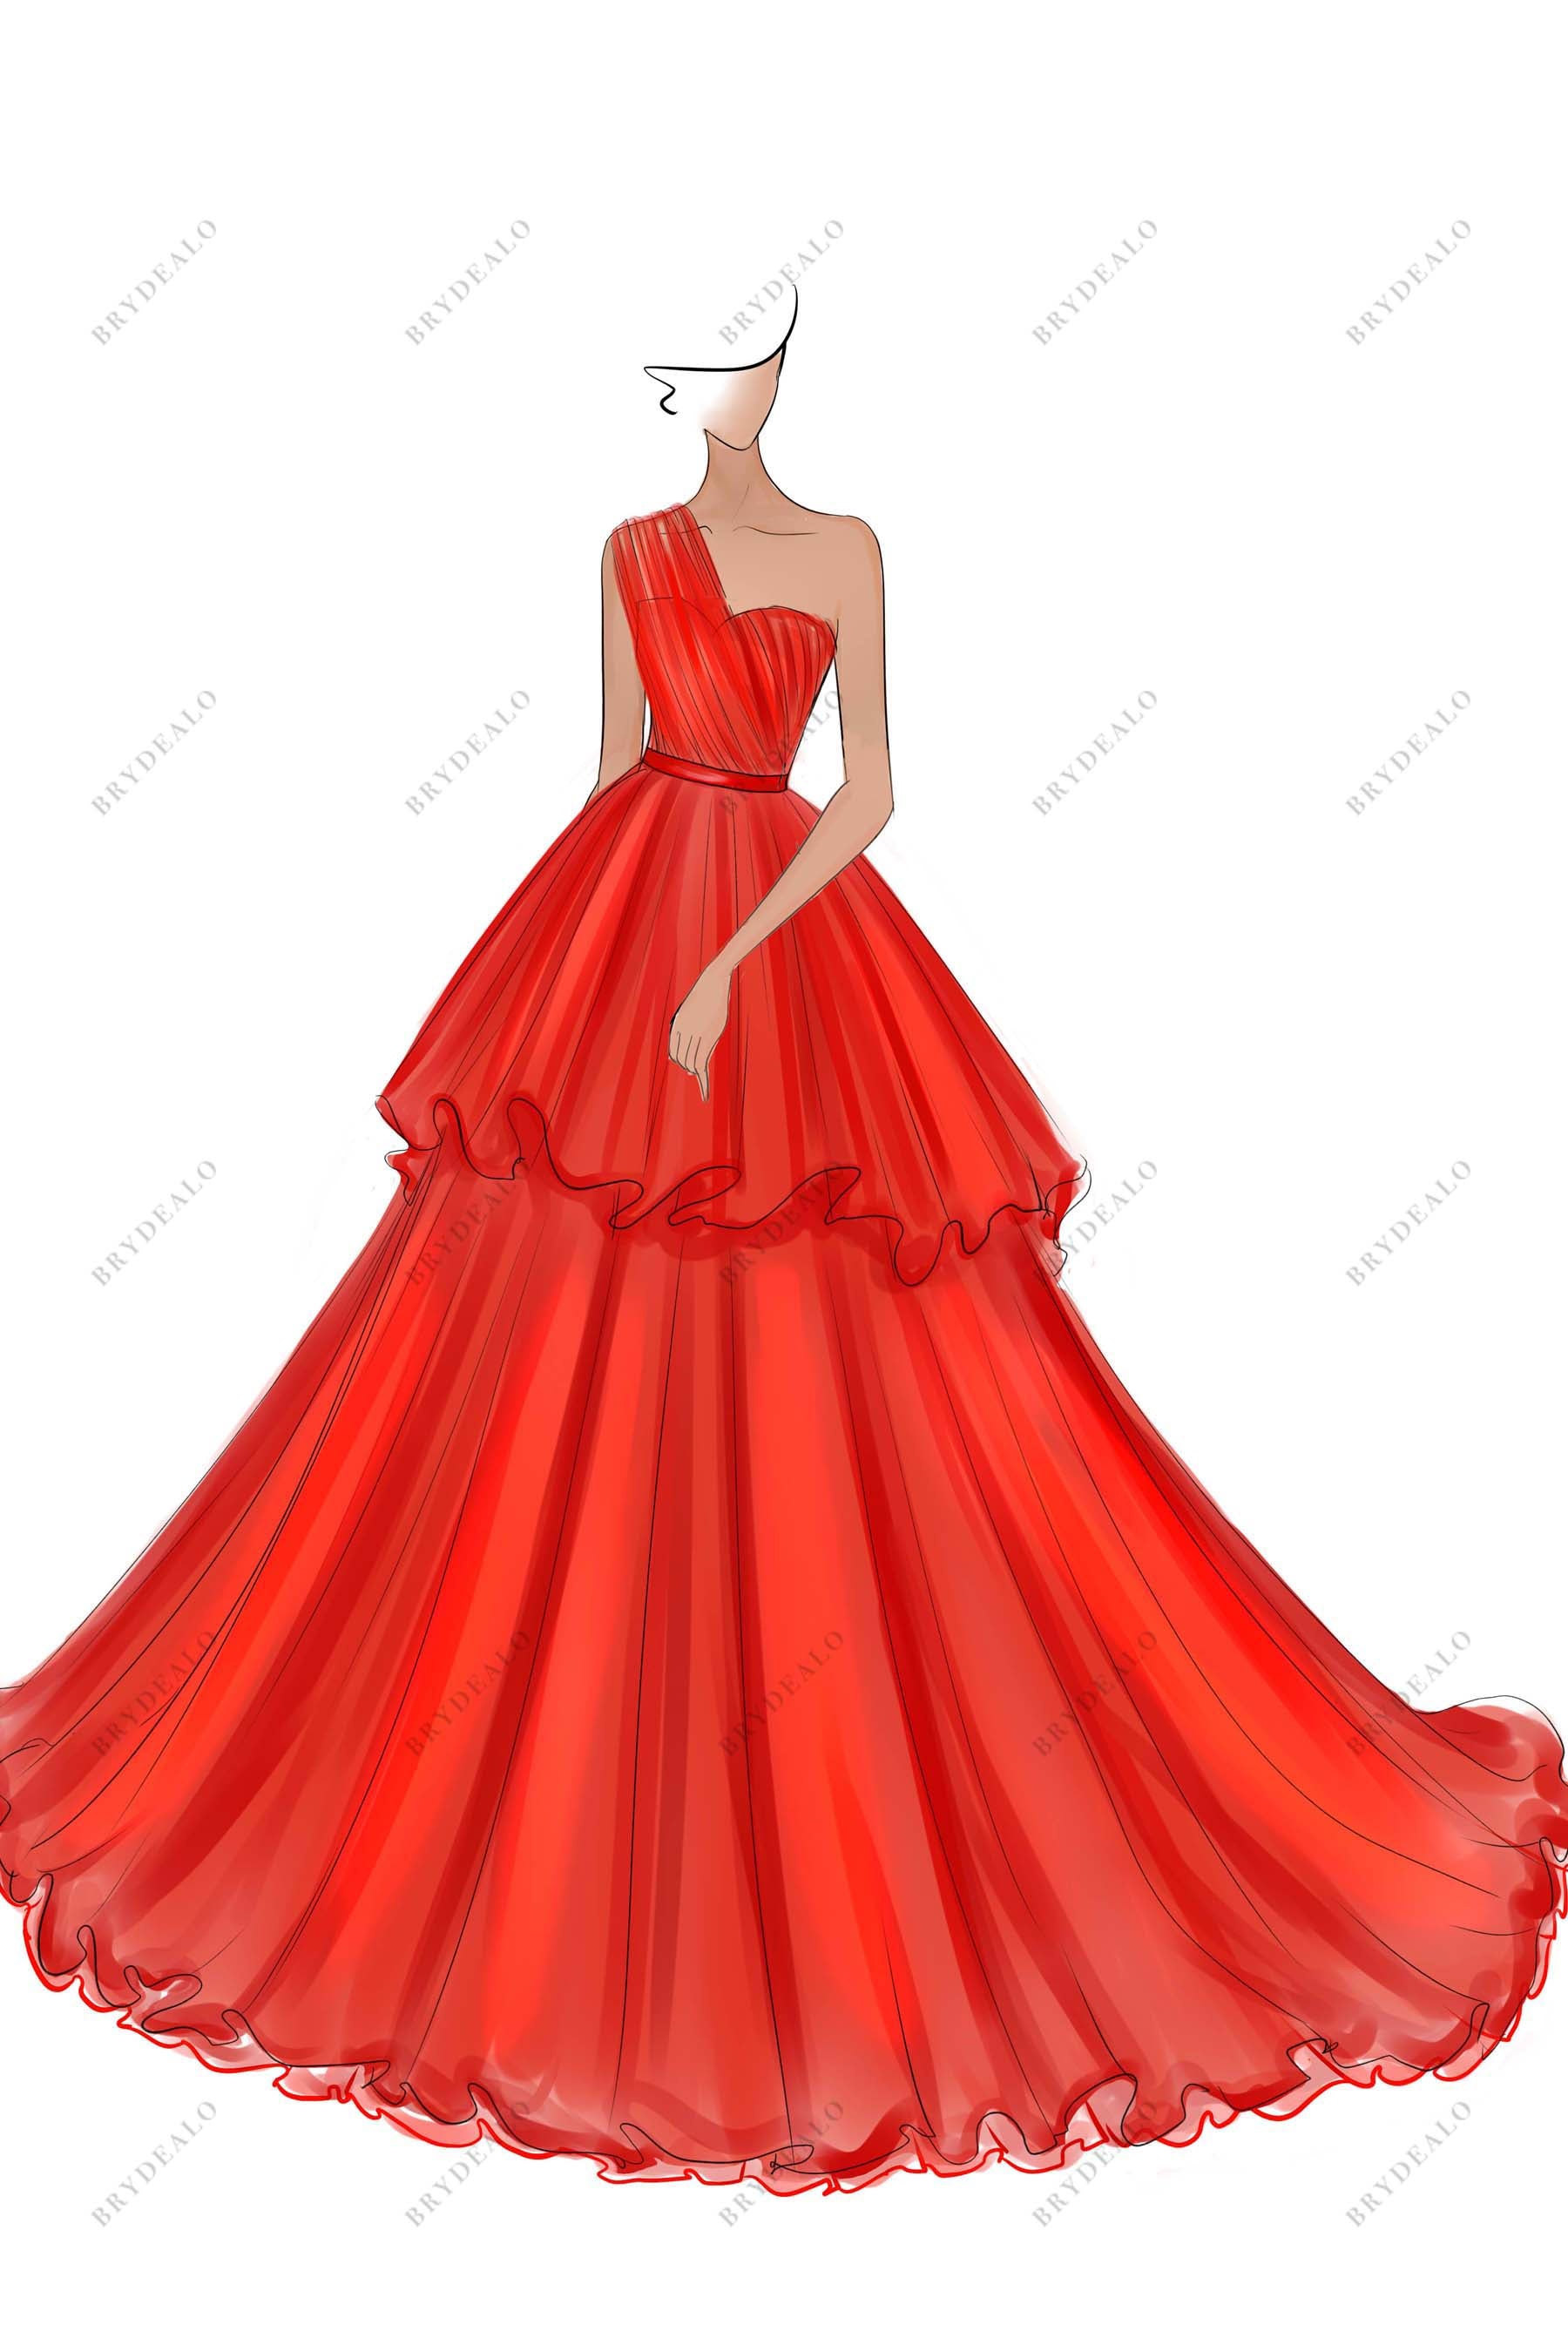 red organza one shoulder prom ball gown sketch